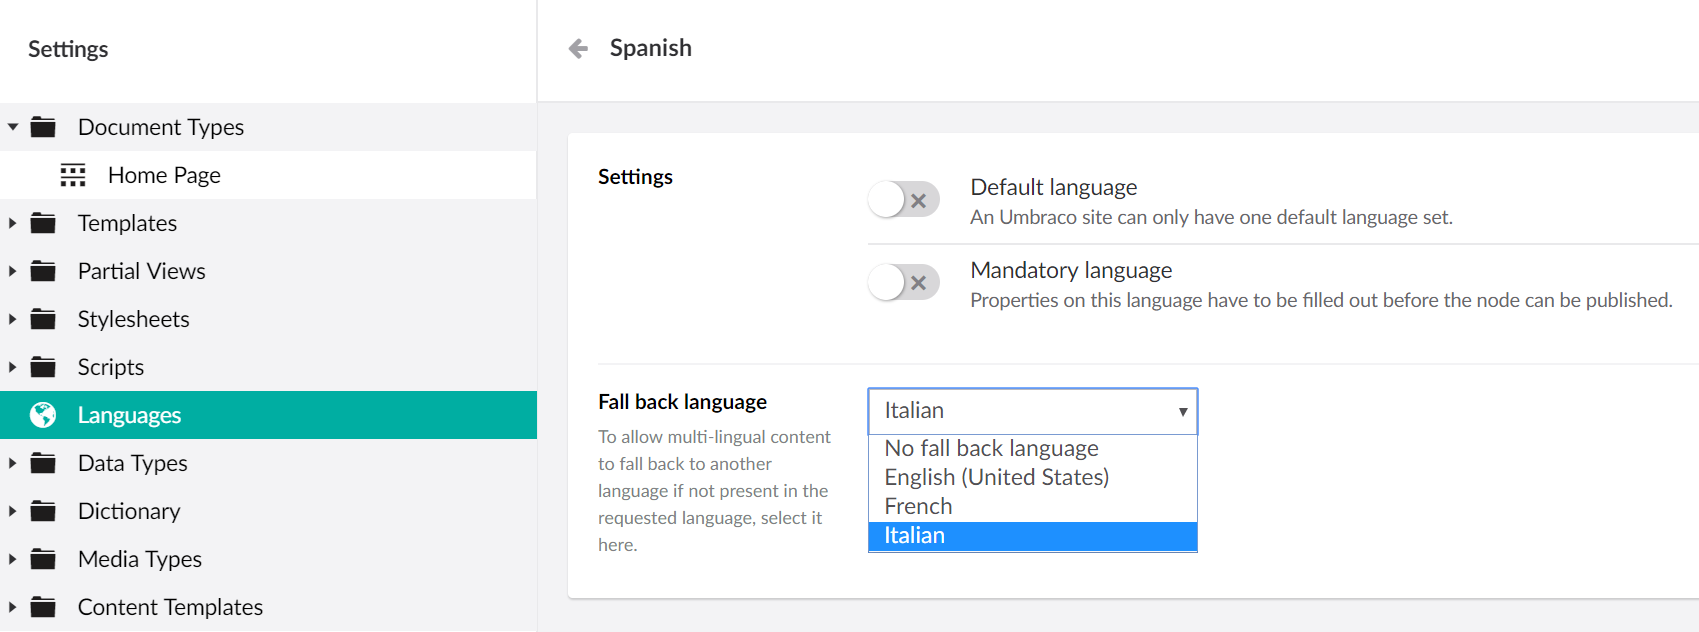 Configuring fall-back languages